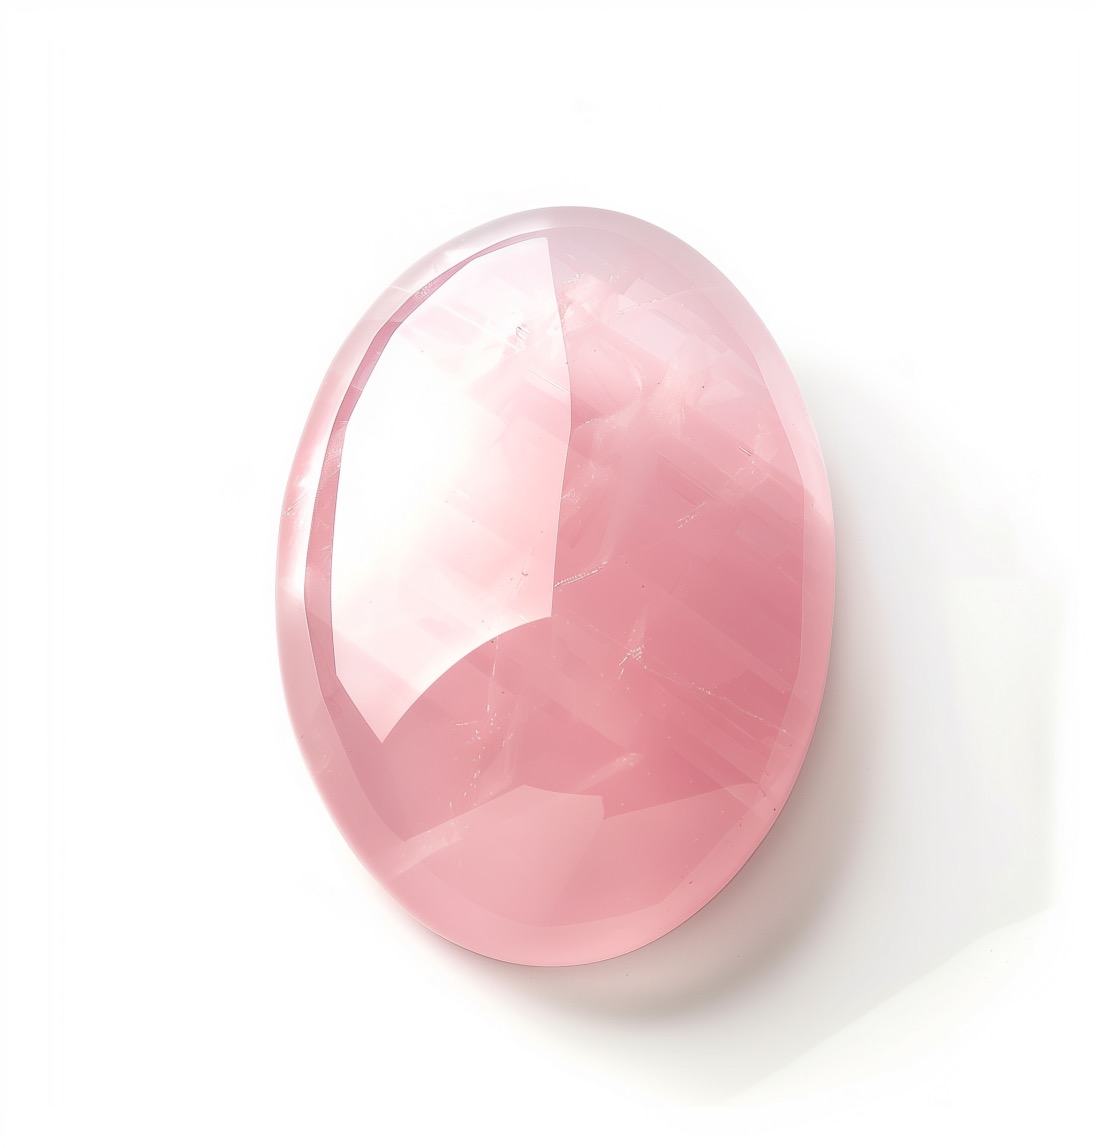 Rose Quartz Palm Stone can be a thoughtful Taurus birthstone gift.